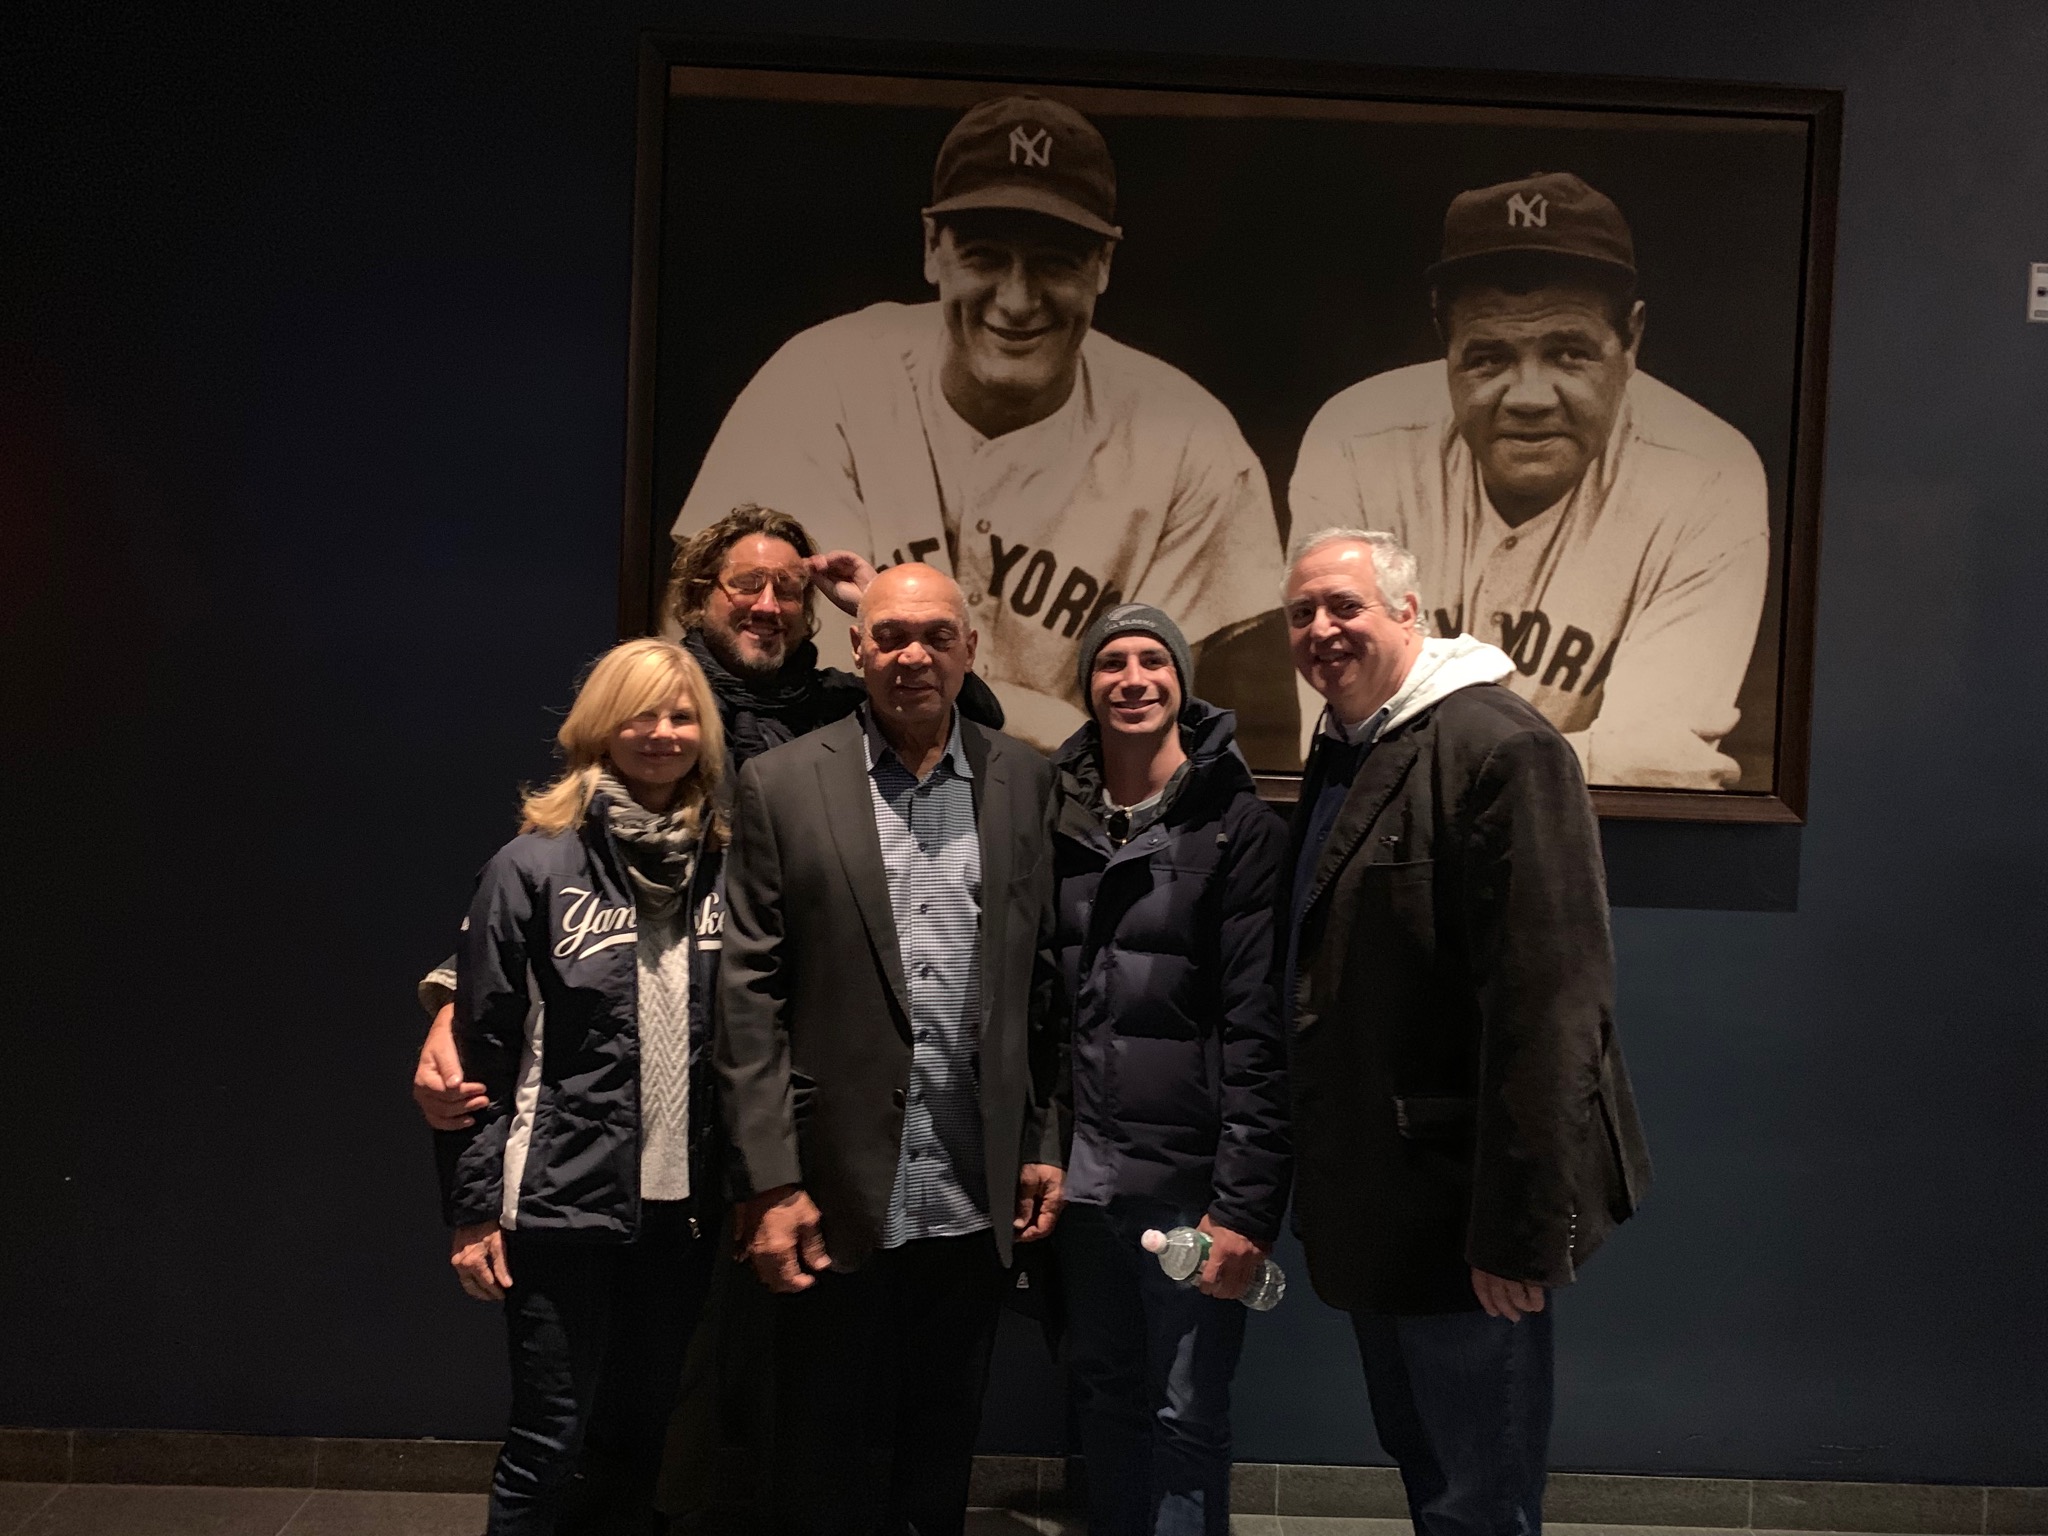 Reggie-Jackson-Jon-Doscher-Nick-Vallelonga-Yankees-in-front-of-photo-BABE-RUTH-AND-LOU-GEHRIG